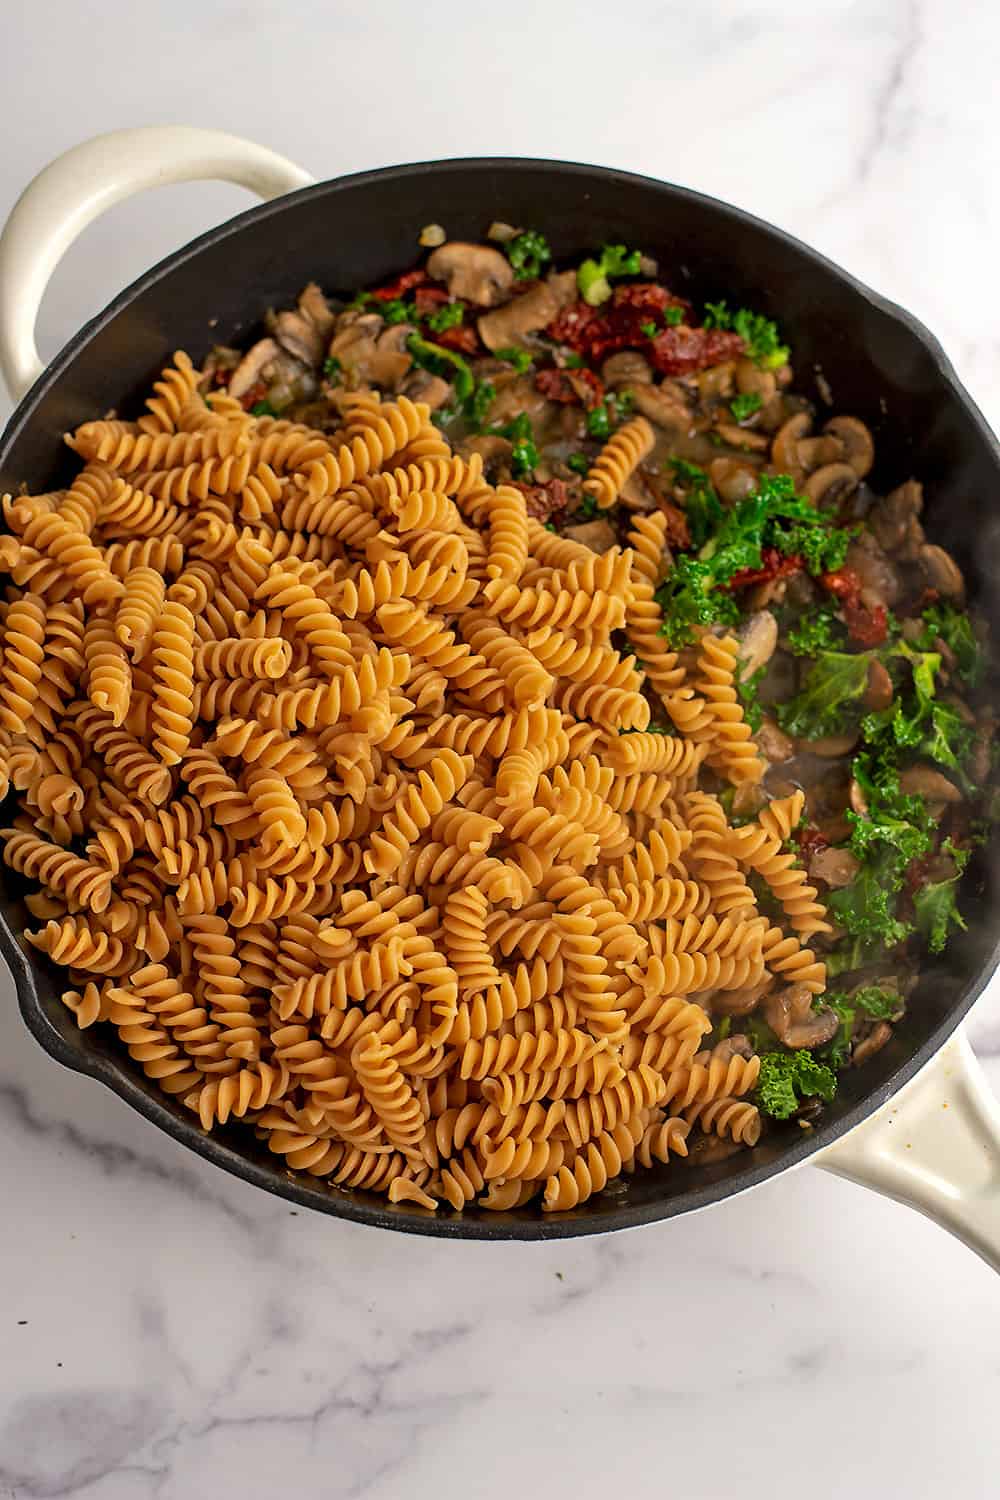 Cooked pasta added to skillet with mushrooms, sundried tomatoes and kale.